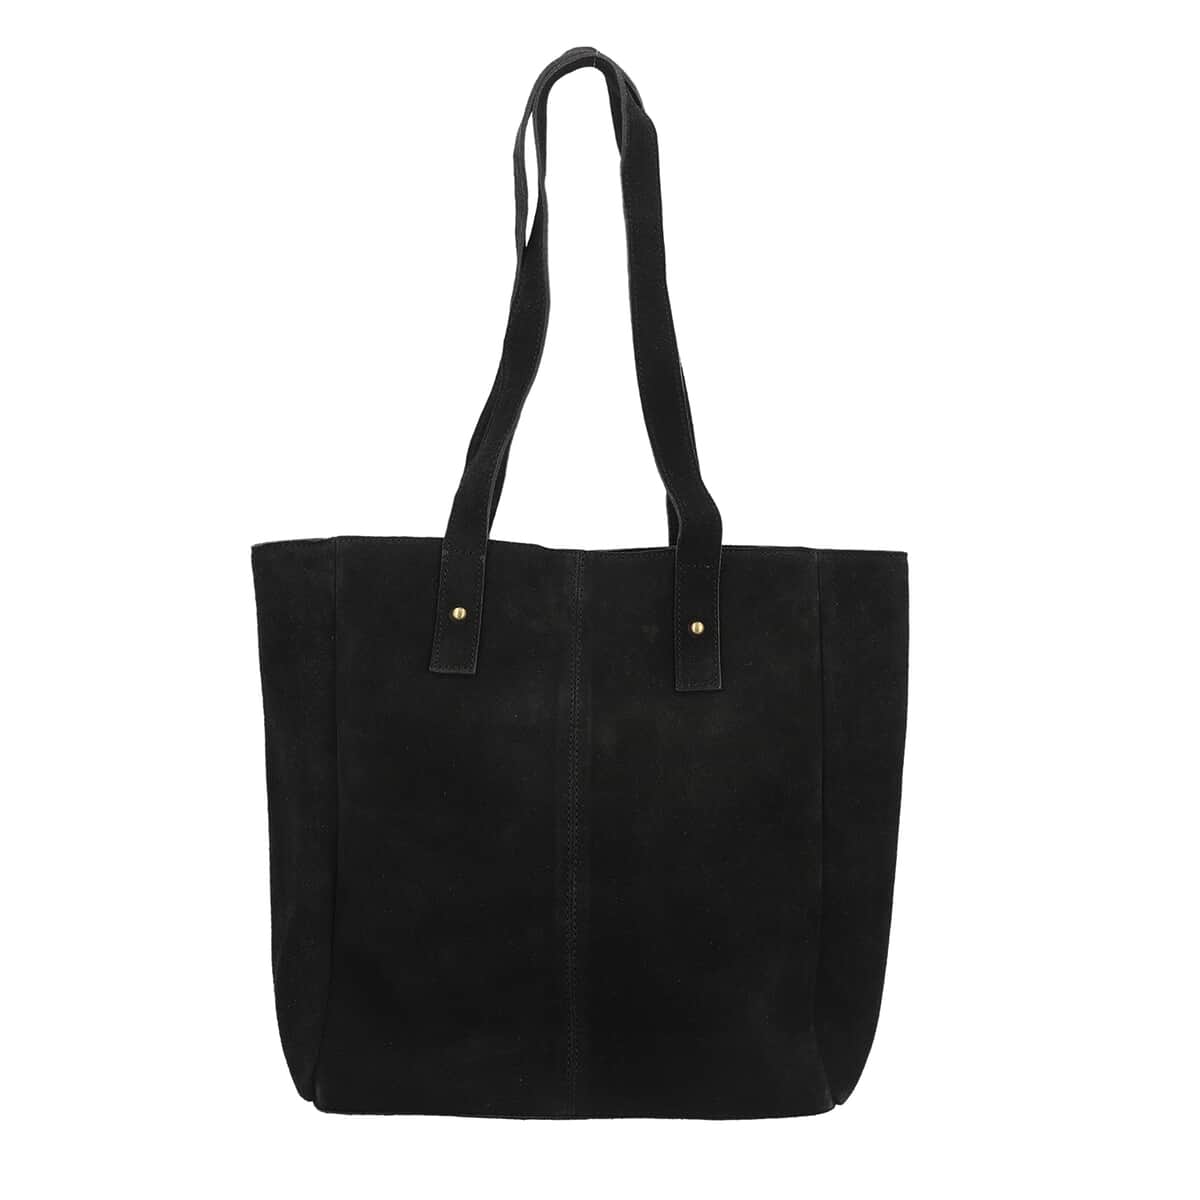 "100% Genuine Leather Tote Bag Color:Black Size: 11.5Lx13Hx4W INCH" image number 4